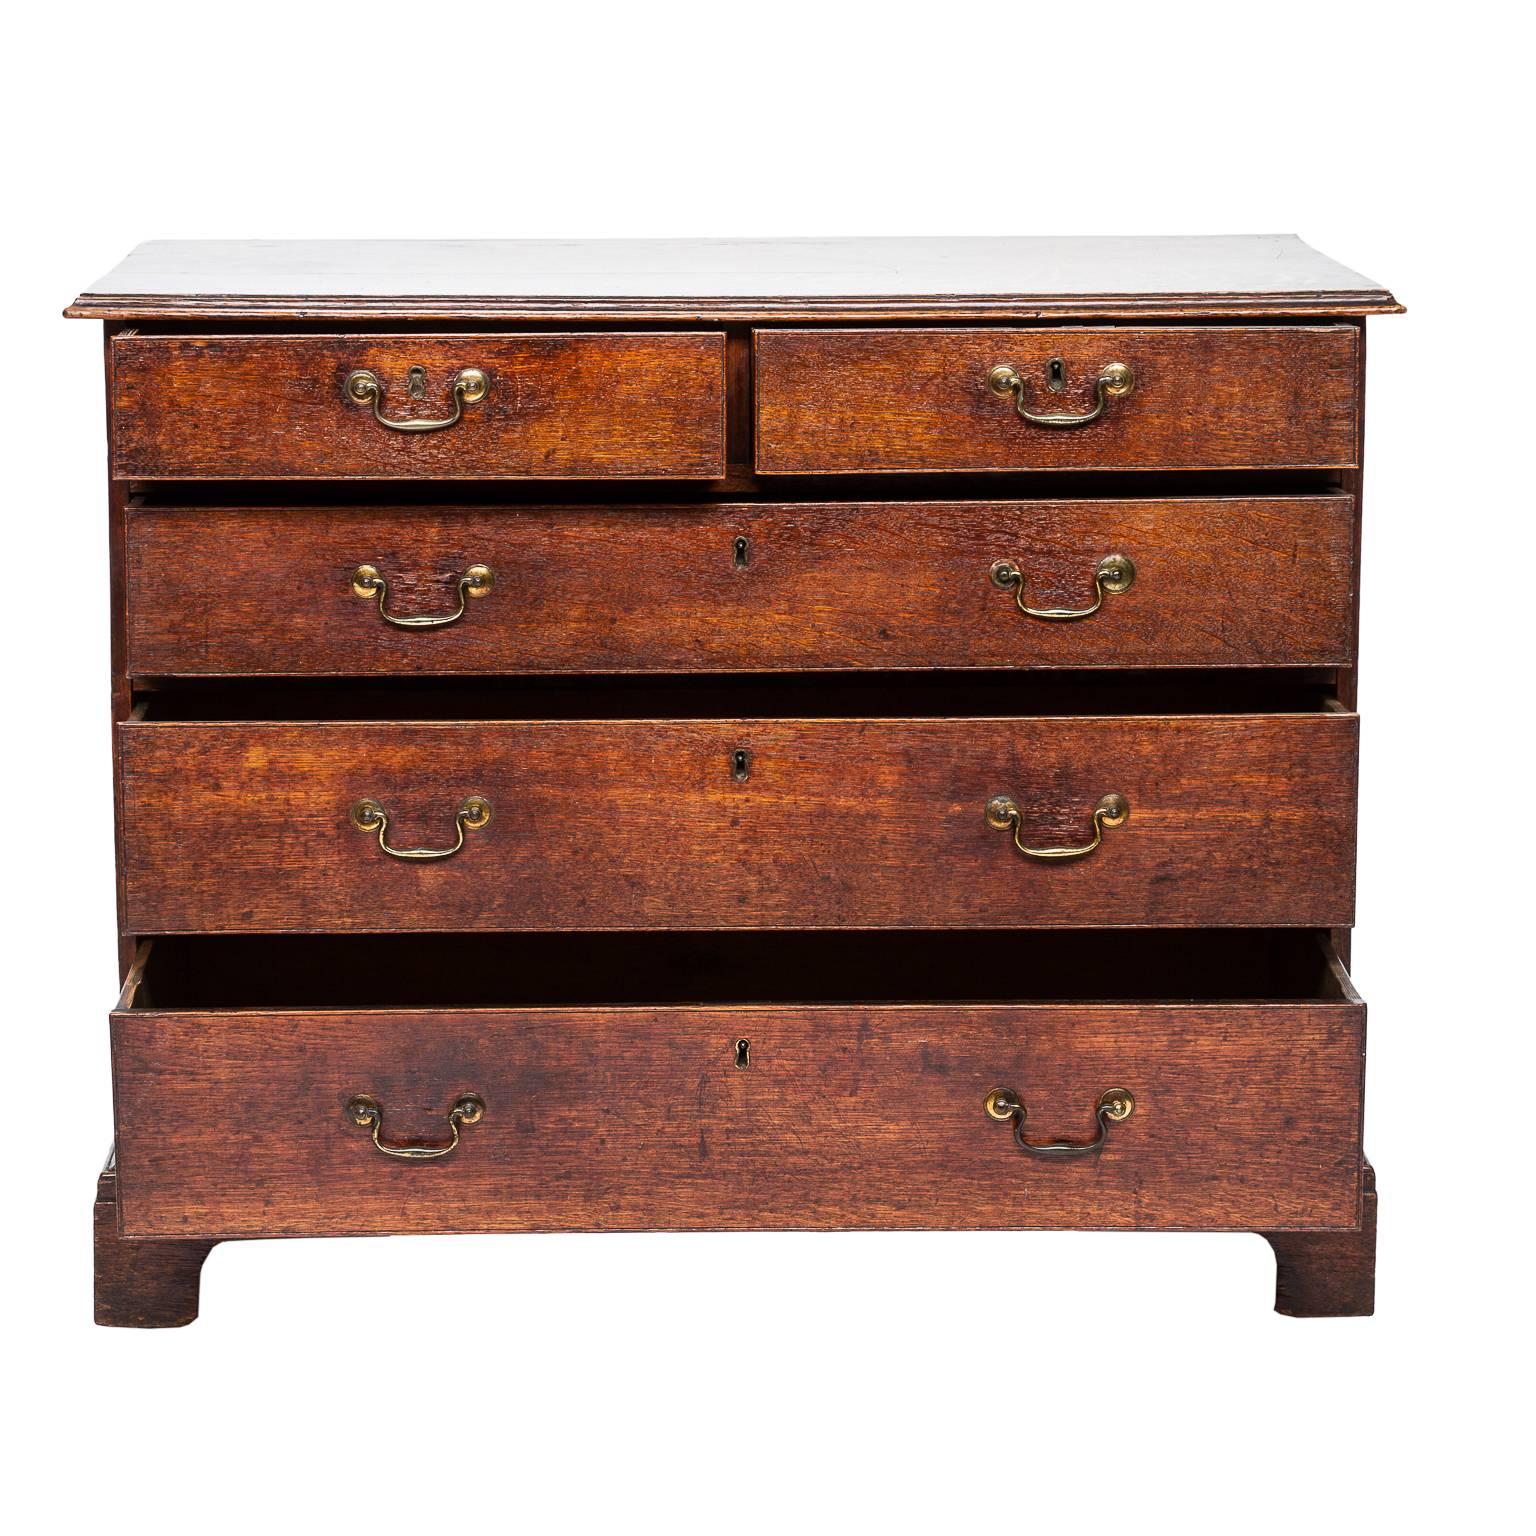 A very nice English two over three chest of drawers made from quarter sawn oakwood. This chest has wonderful simple look. Nice bracket feet and worn brass bail pulls, circa 1840.